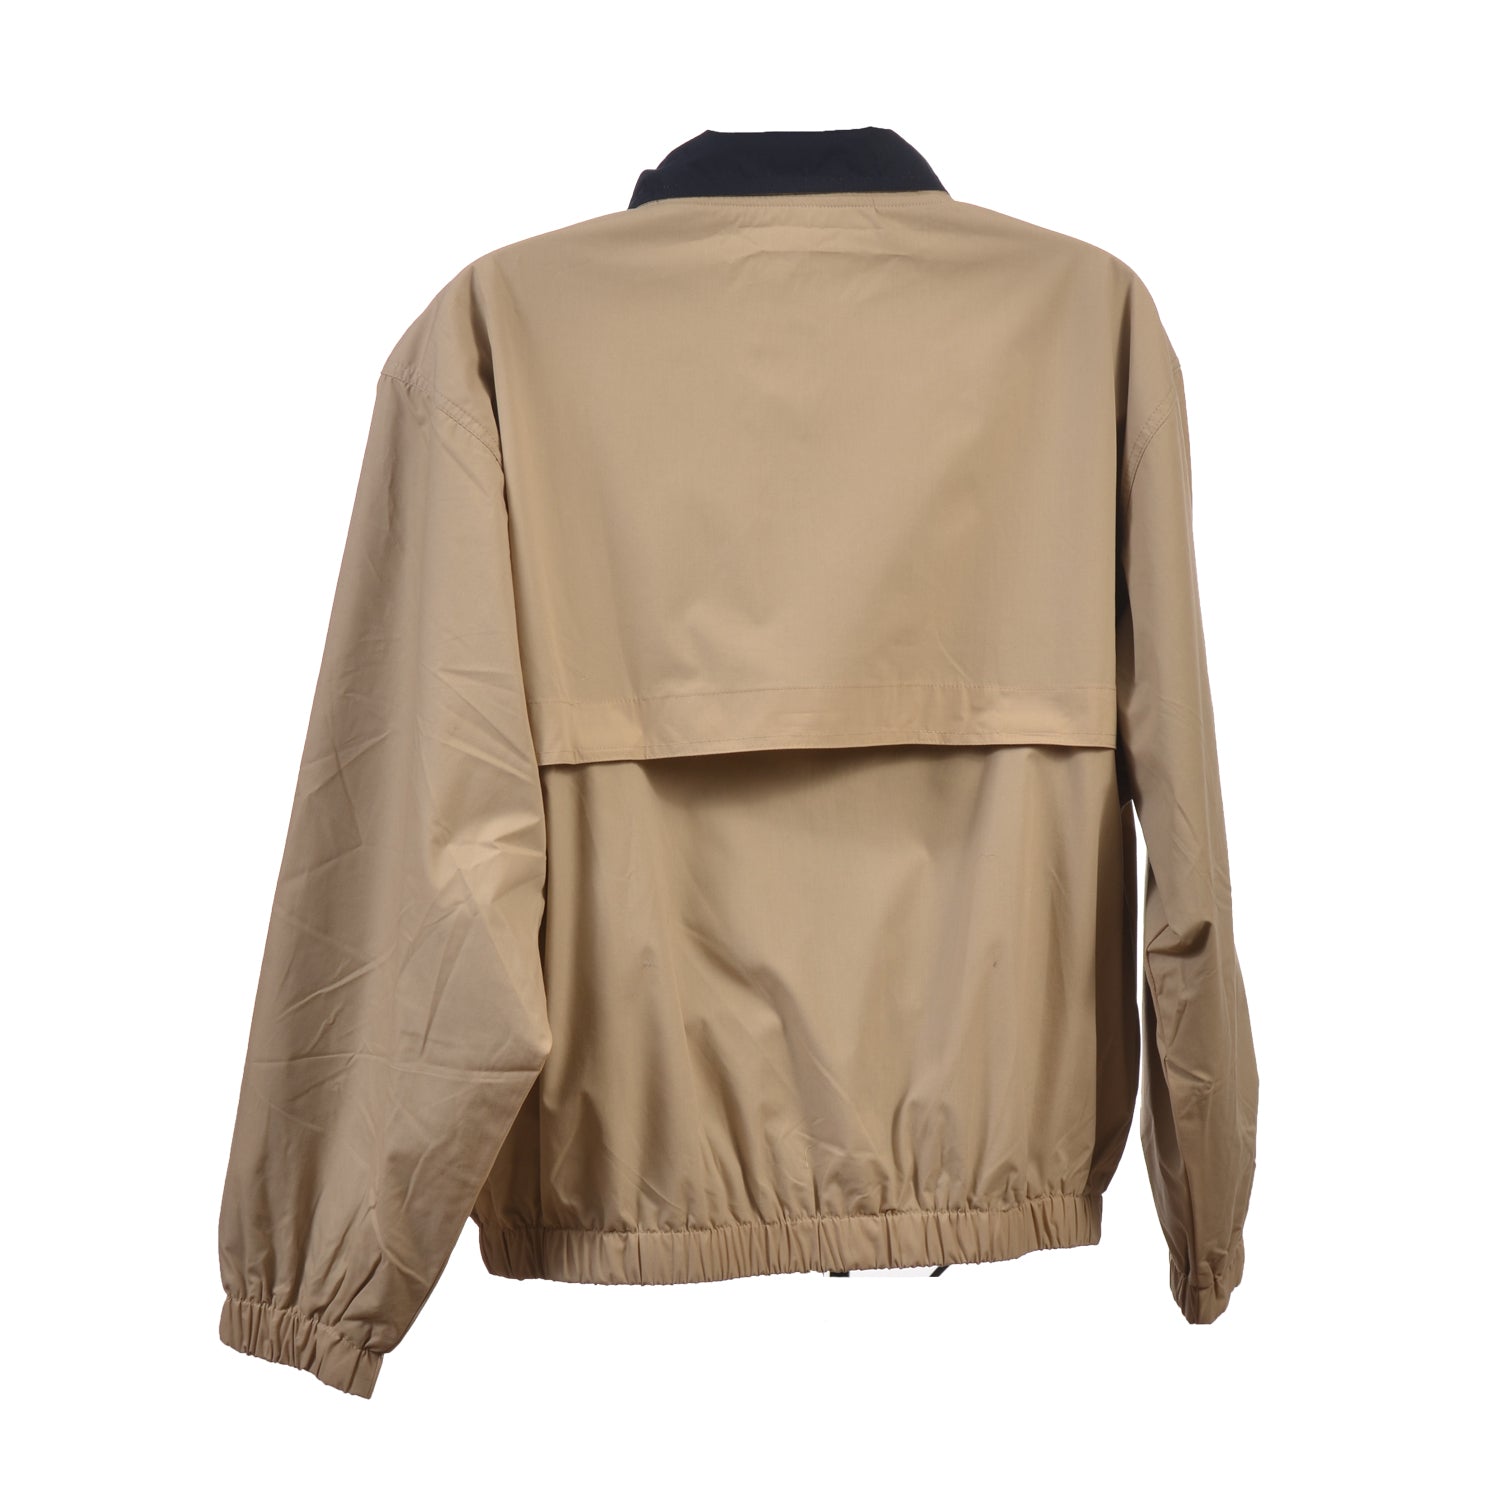 Men's Microfiber Clubhouse Jacket $60.00 – The National Packard Museum